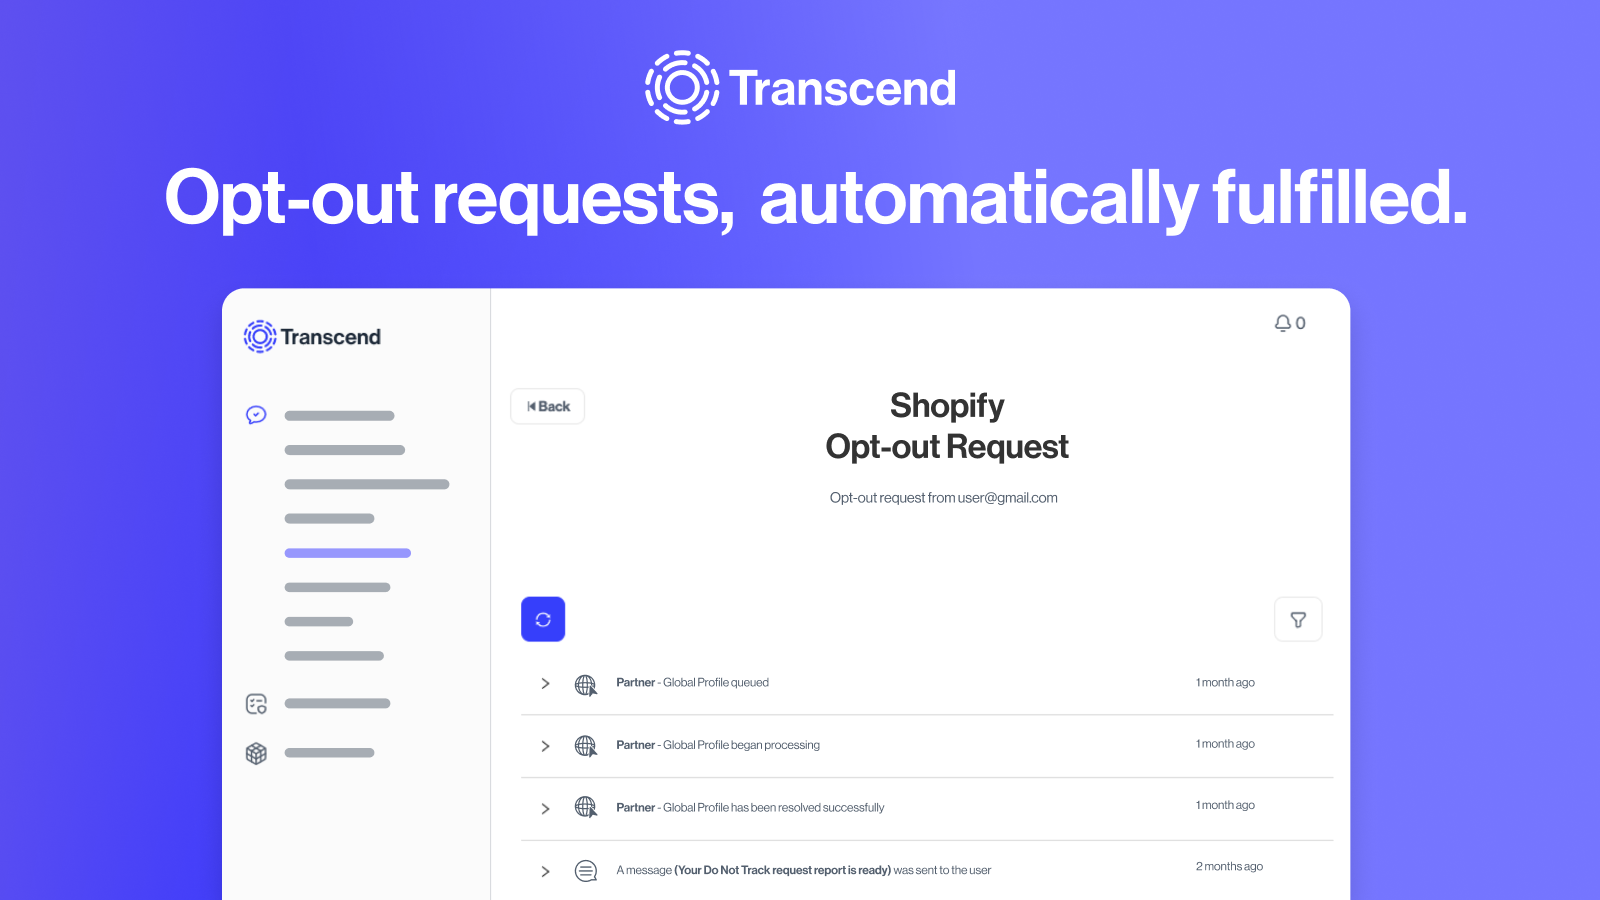 Automate opt-out requests for customers in Shopify.